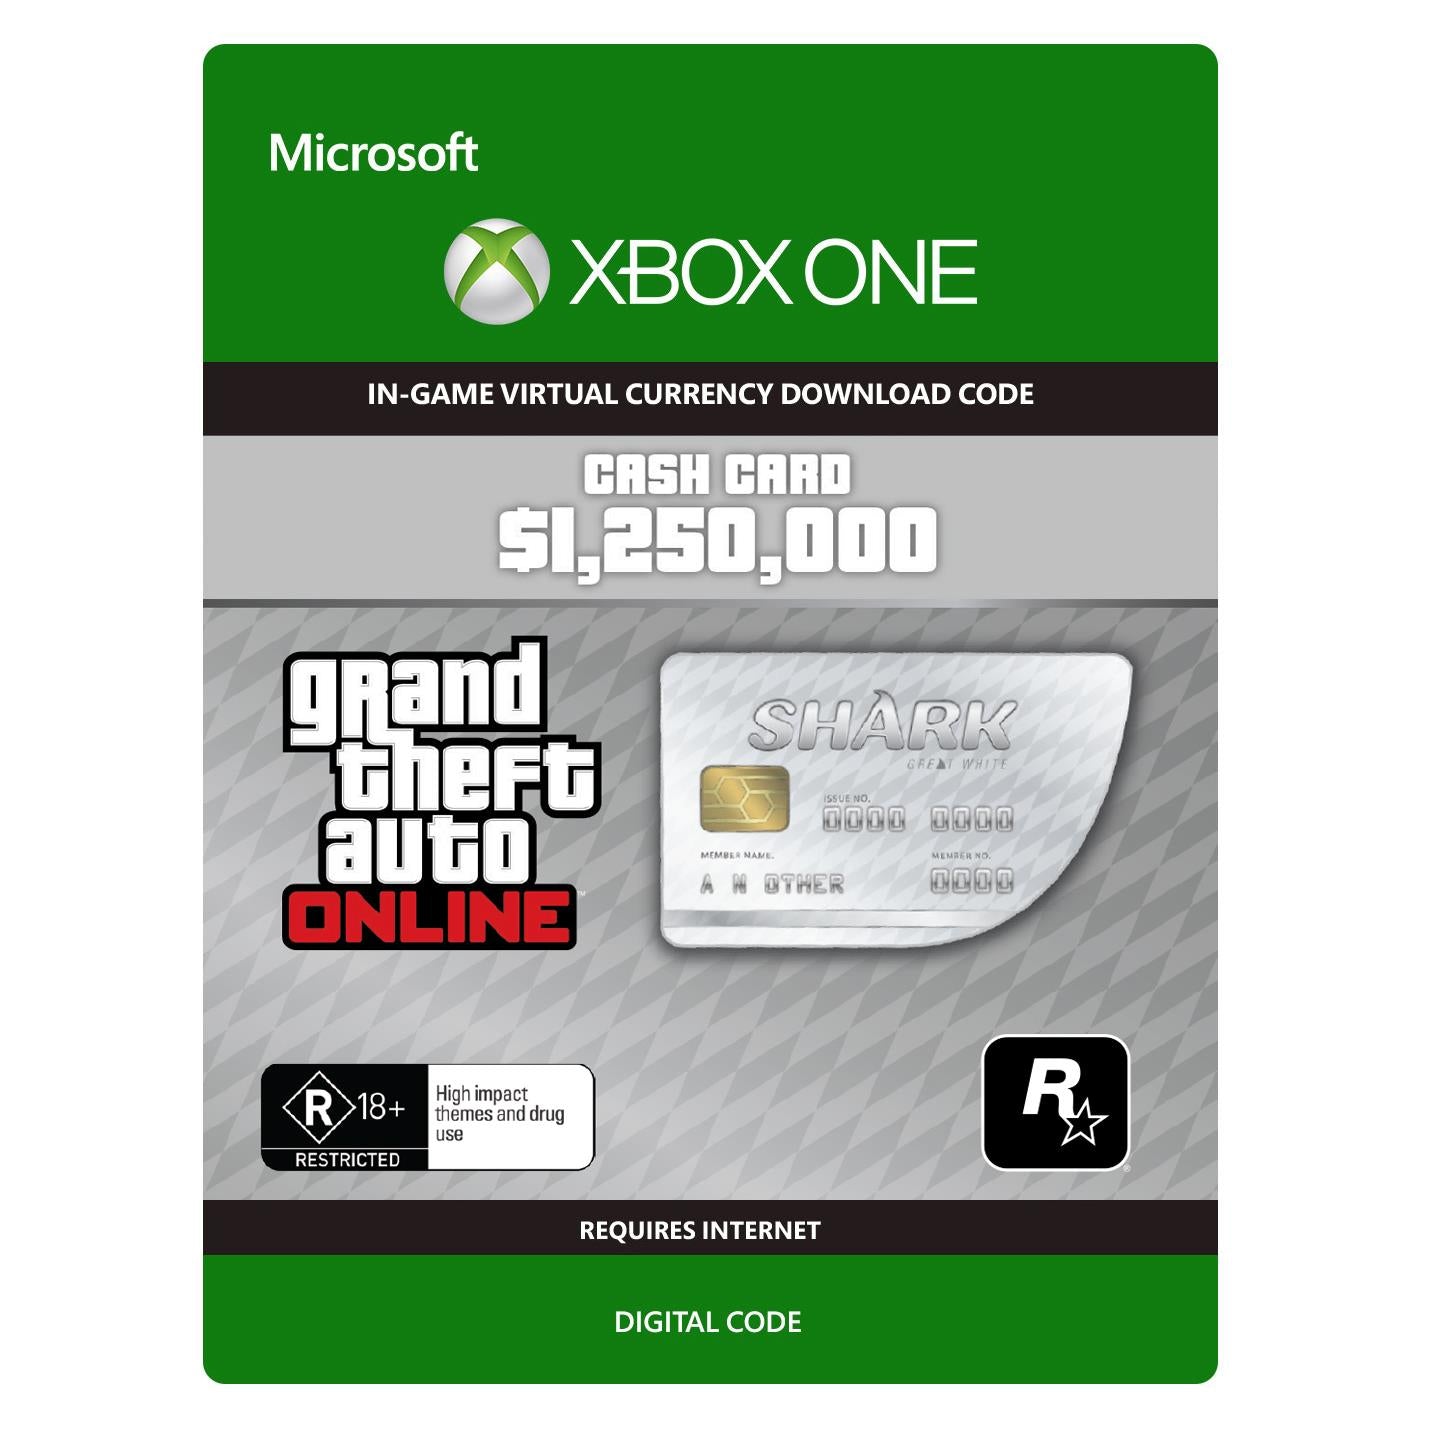 Grand Theft Auto Online $1,250,000 Great White Shark Card Download) - JB